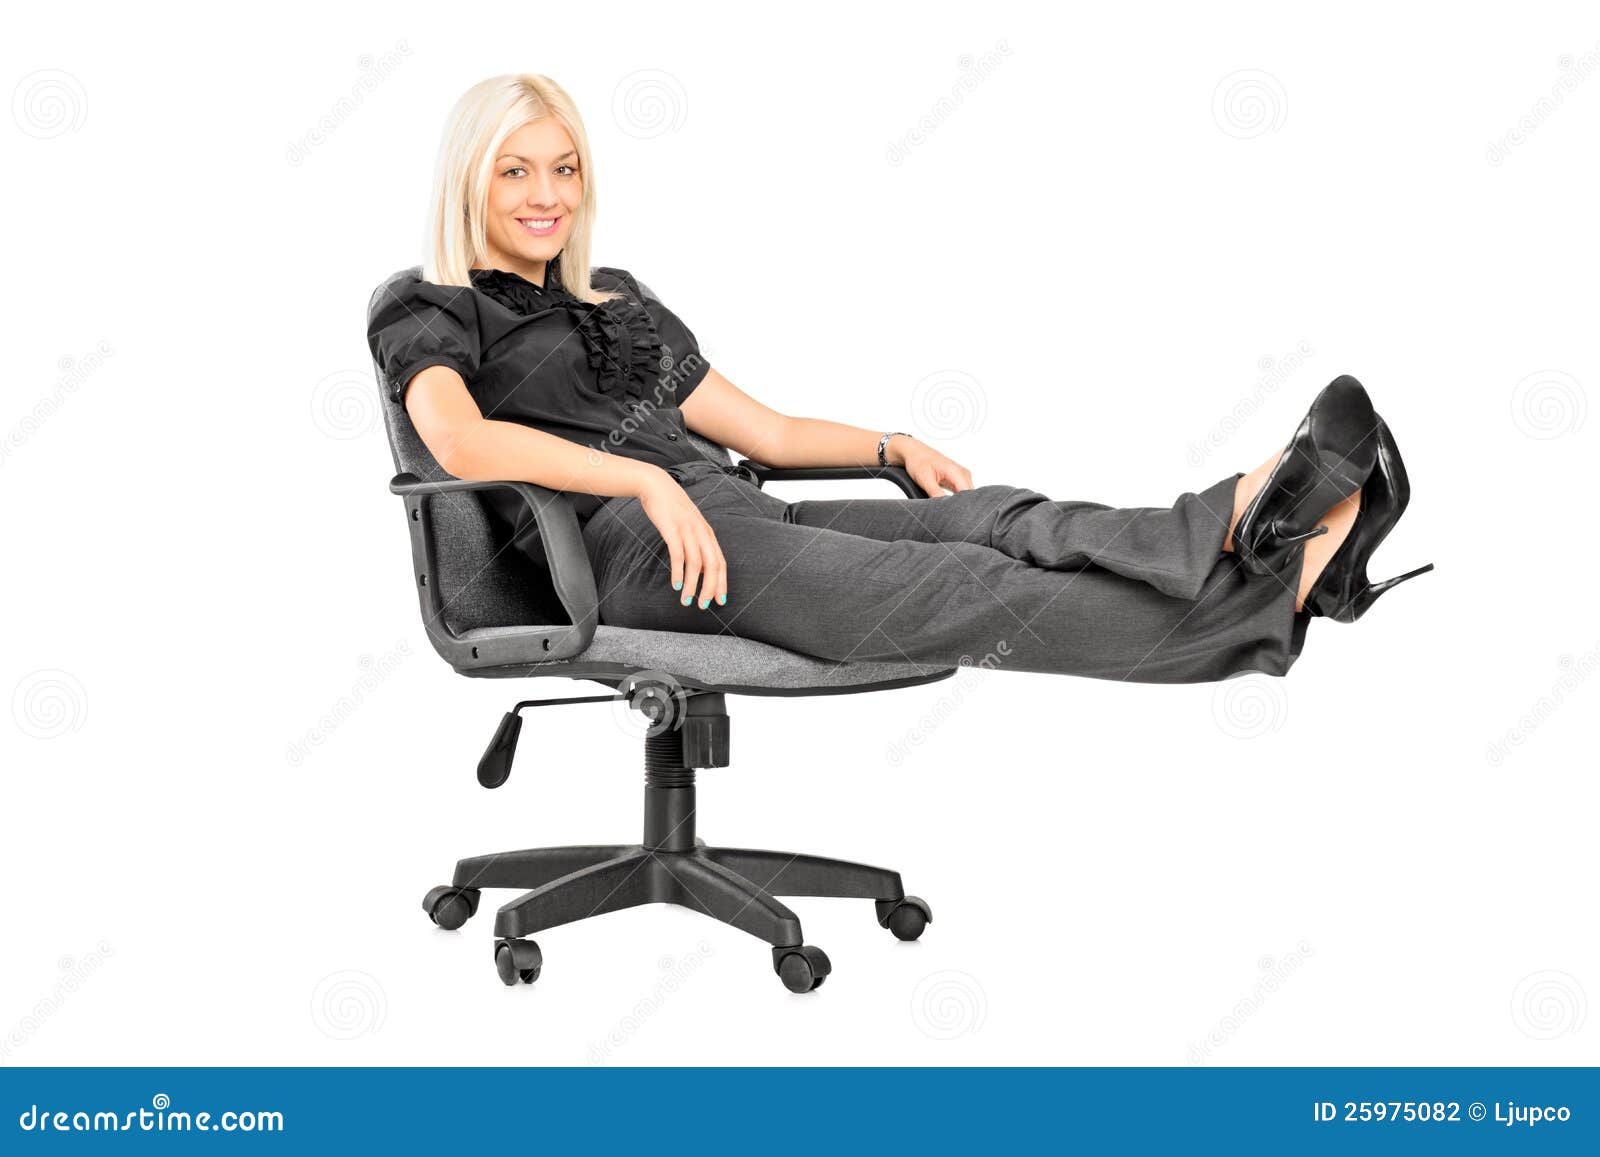 young-woman-sitting-chair-her-legs-up-25